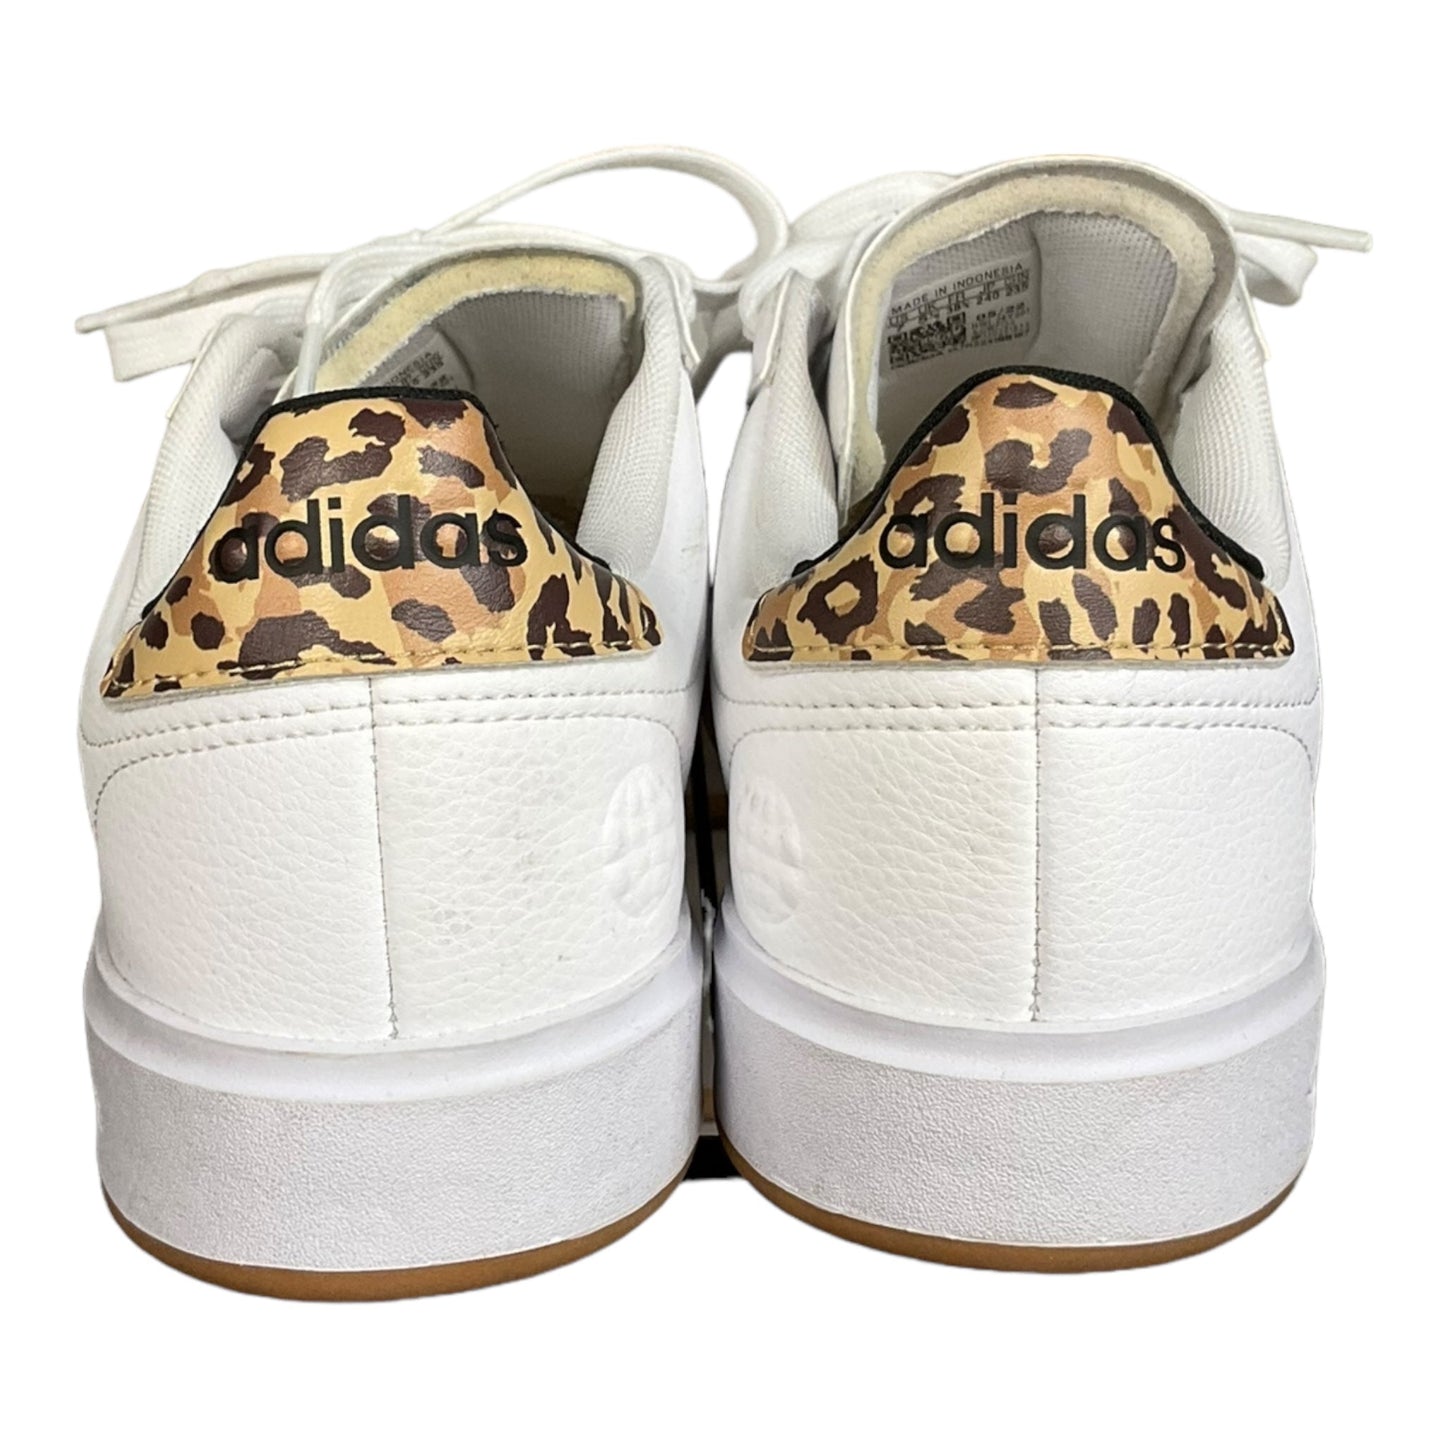 White Shoes Sneakers Adidas, Size 7